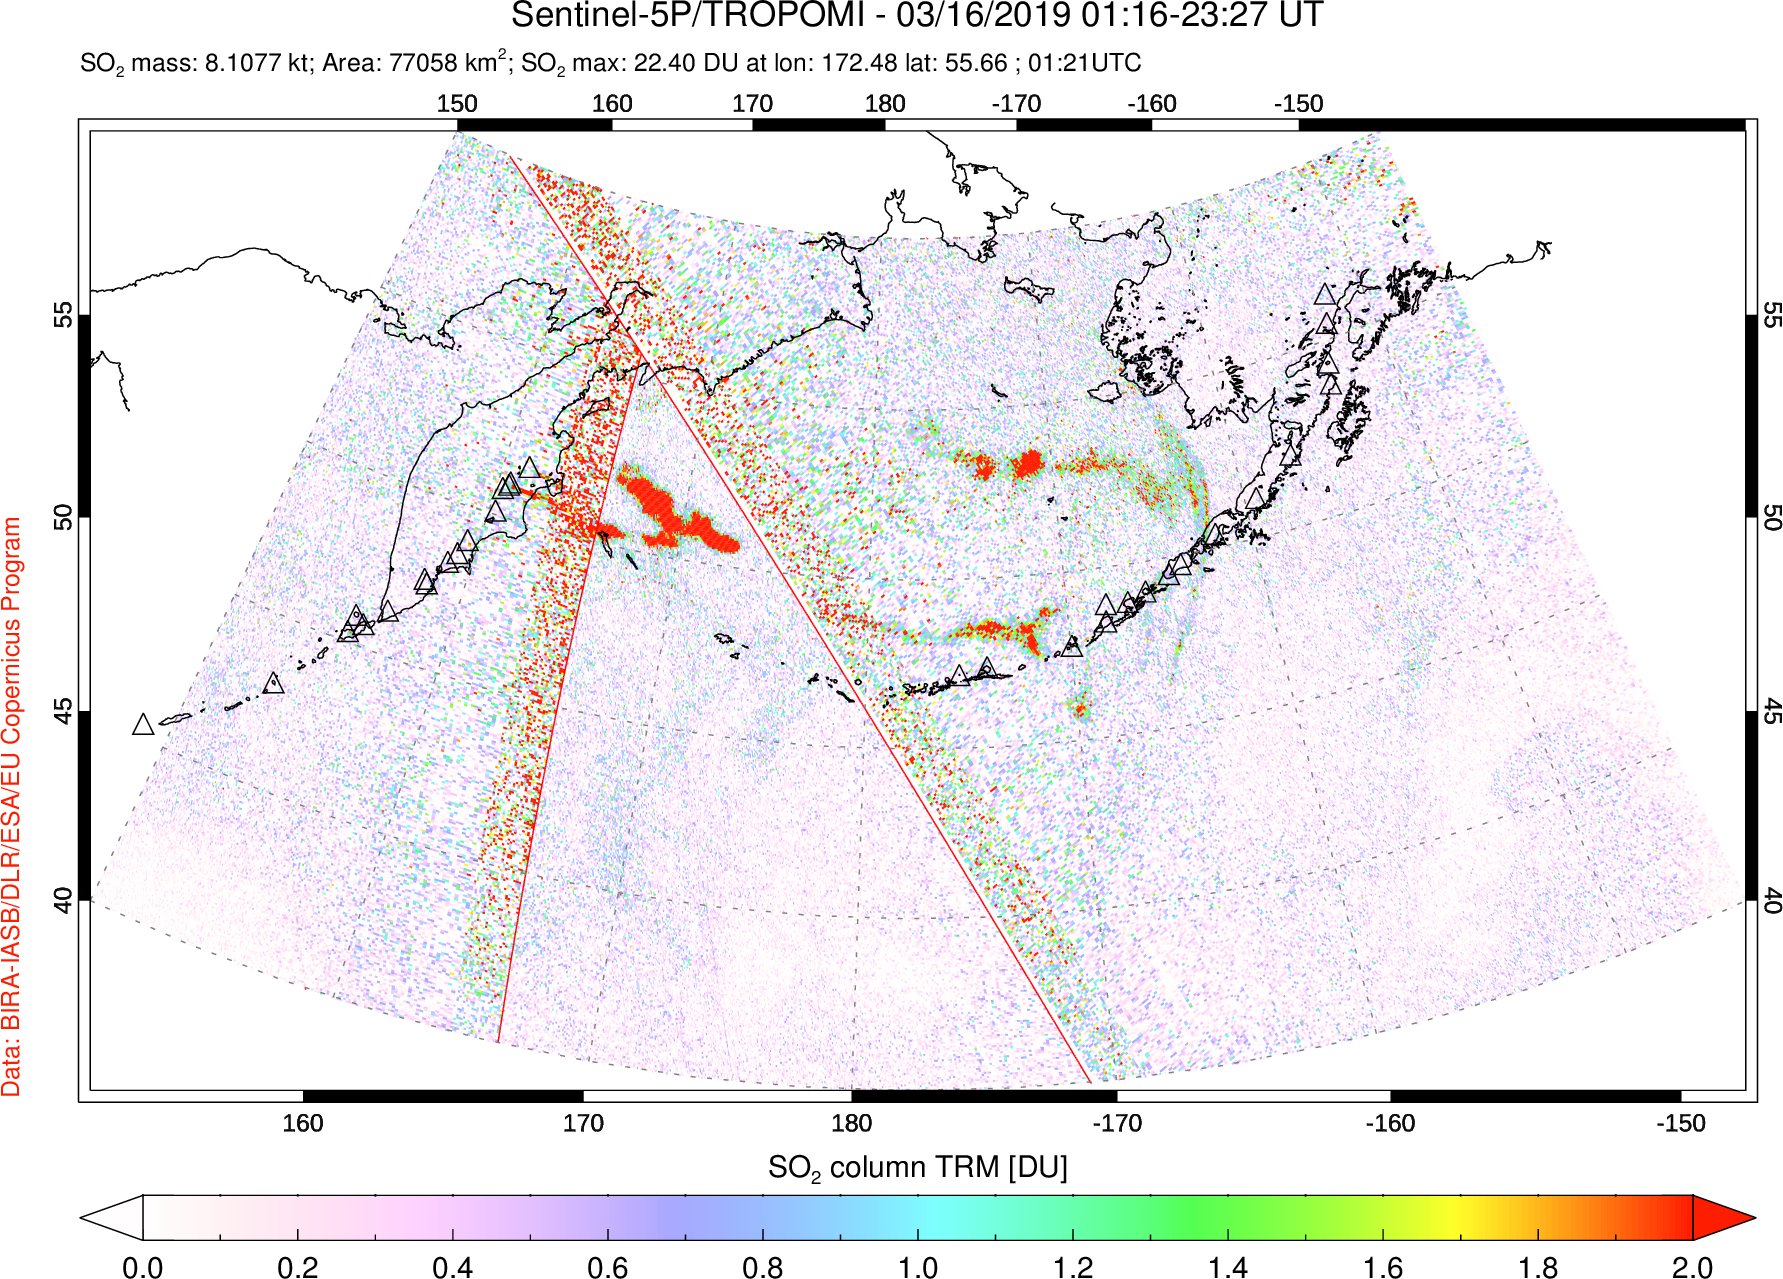 A sulfur dioxide image over North Pacific on Mar 16, 2019.